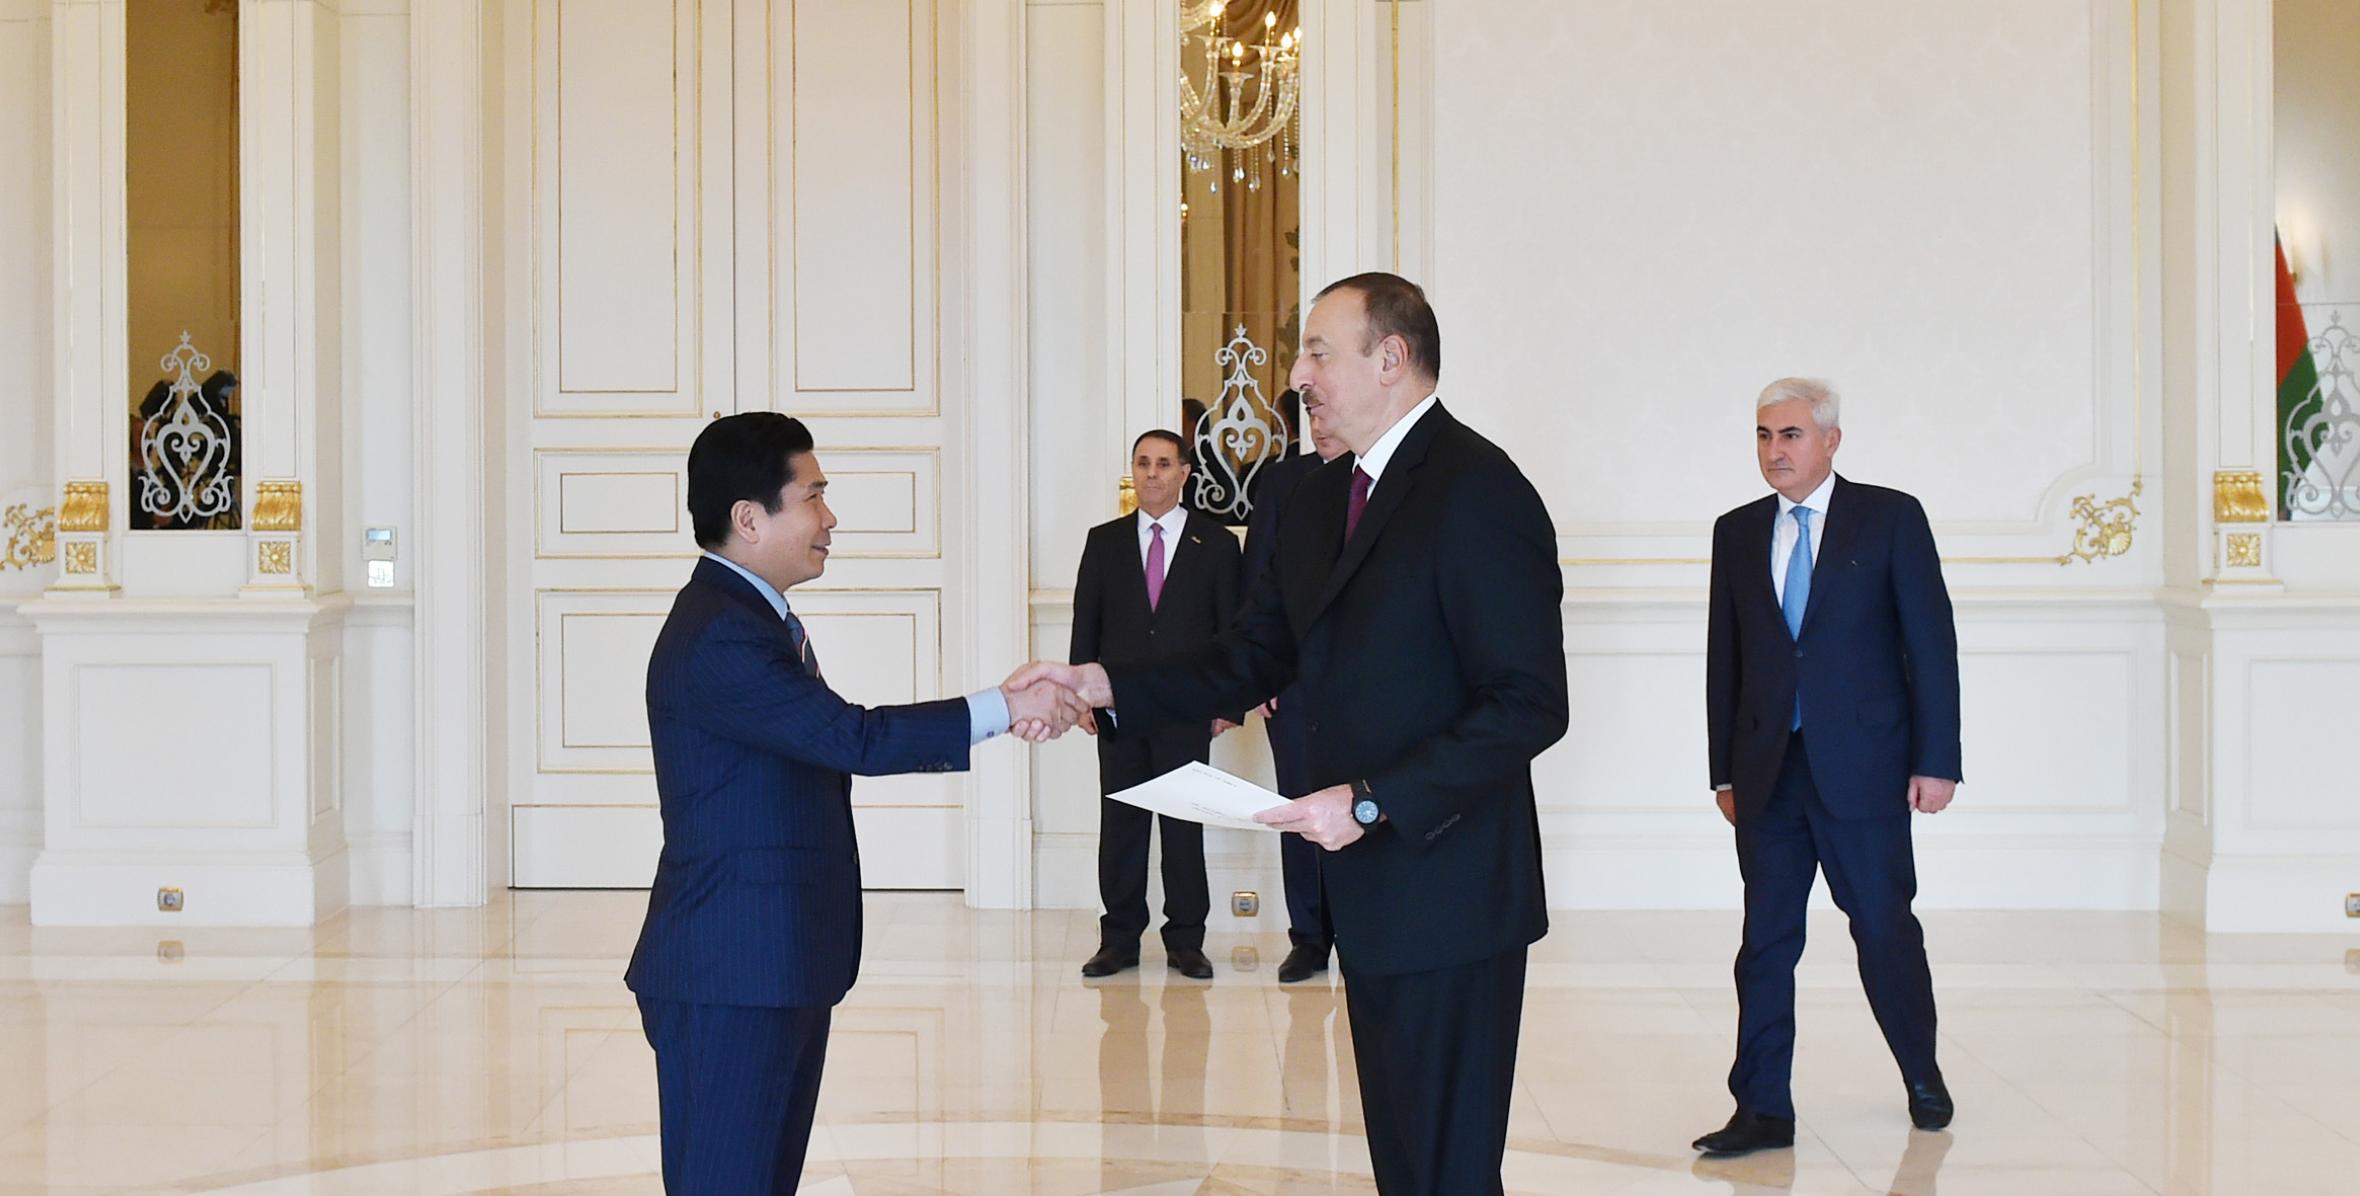 Ilham Aliyev received the credentials of the incoming Korean Ambassador